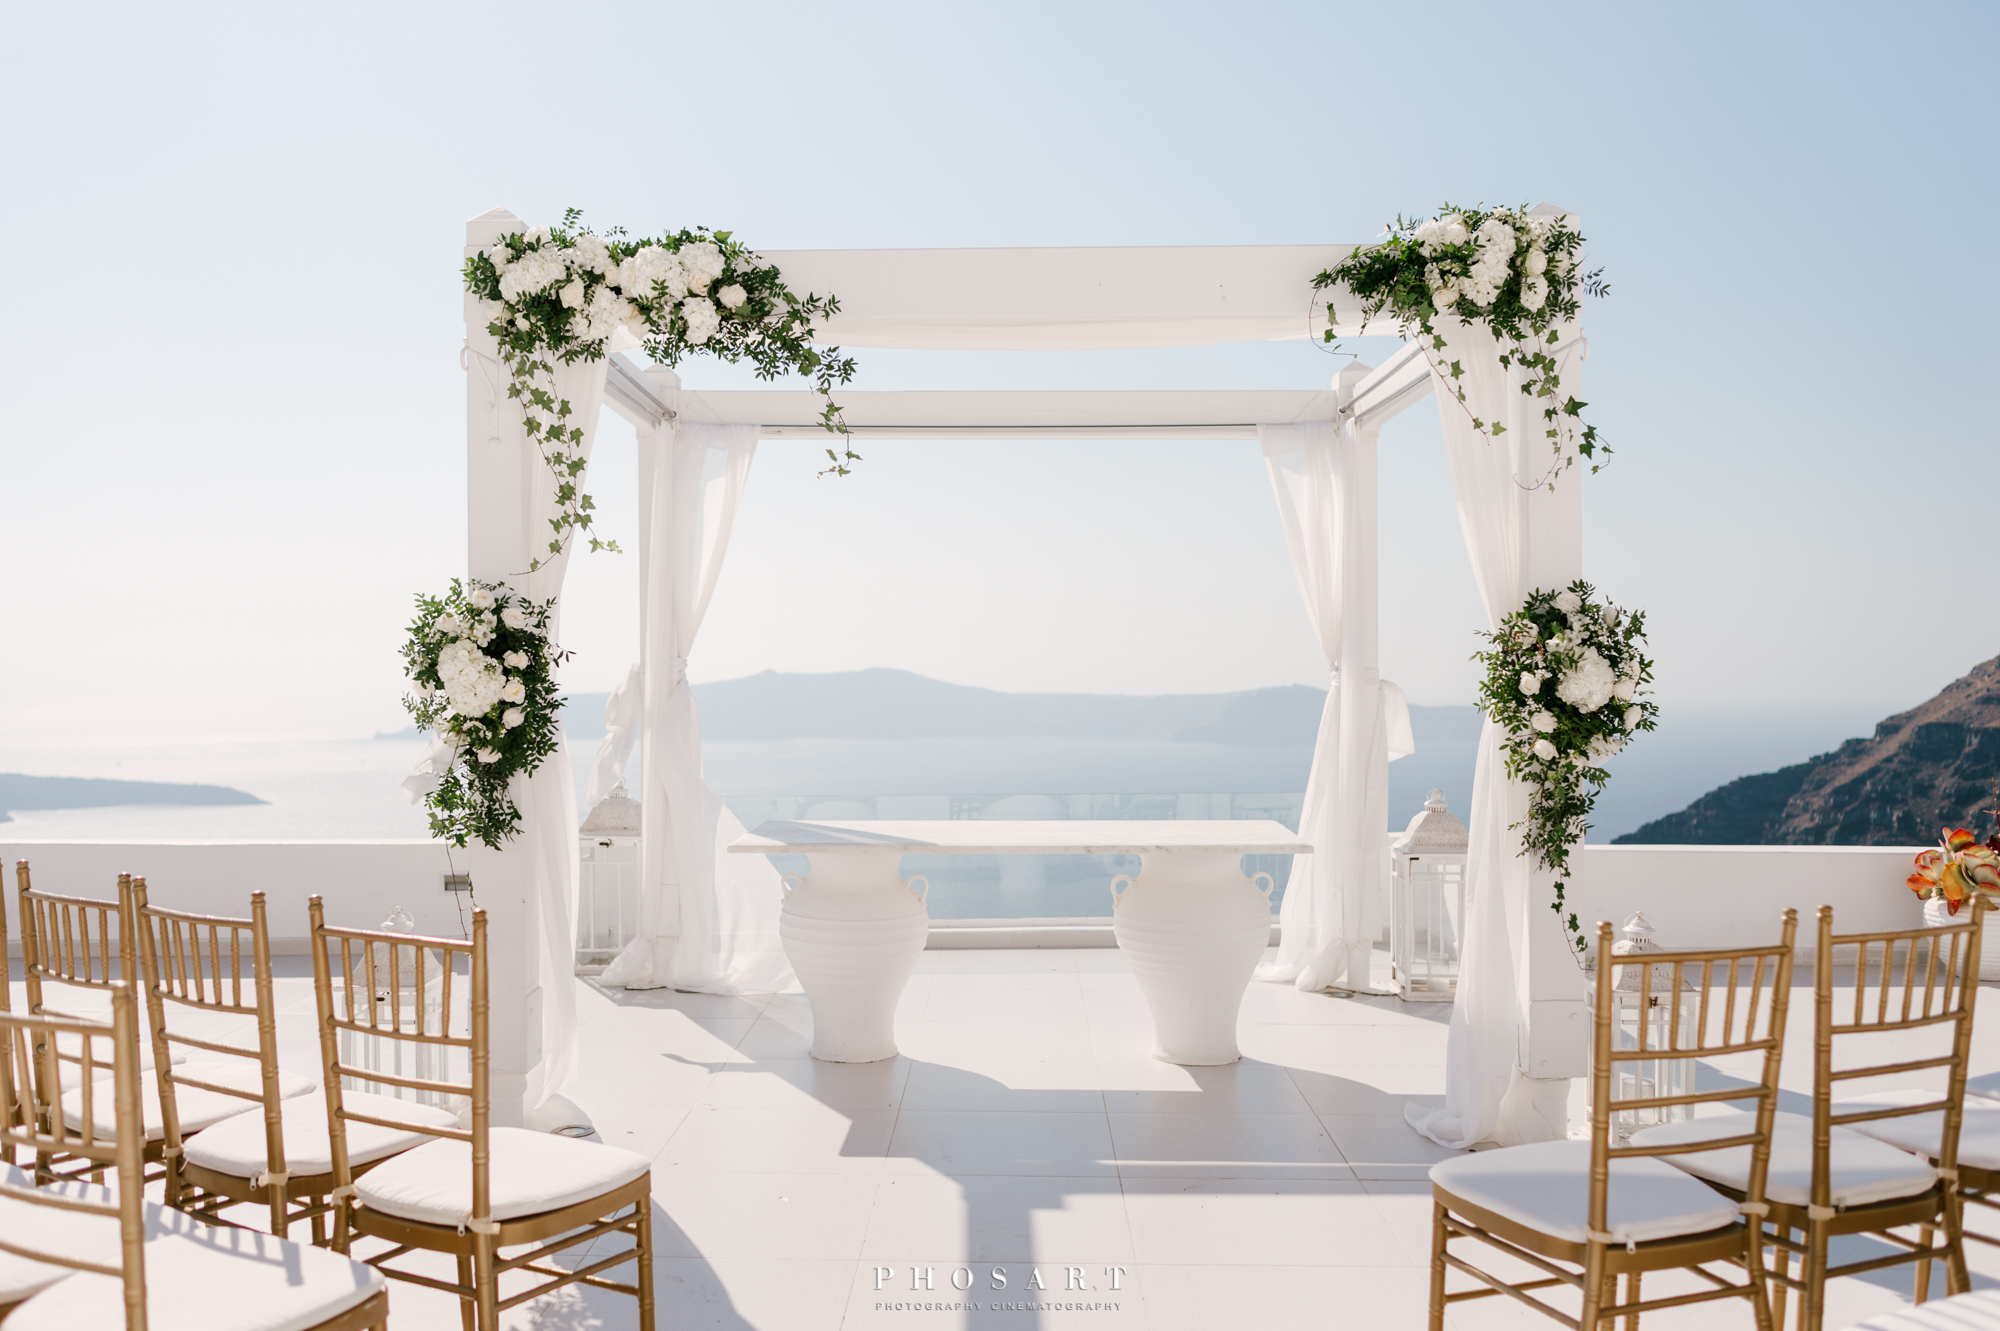 A white wooden wedding gazebo overlooking the Aegean, decorated with white flowers and wooden gold empty chairs